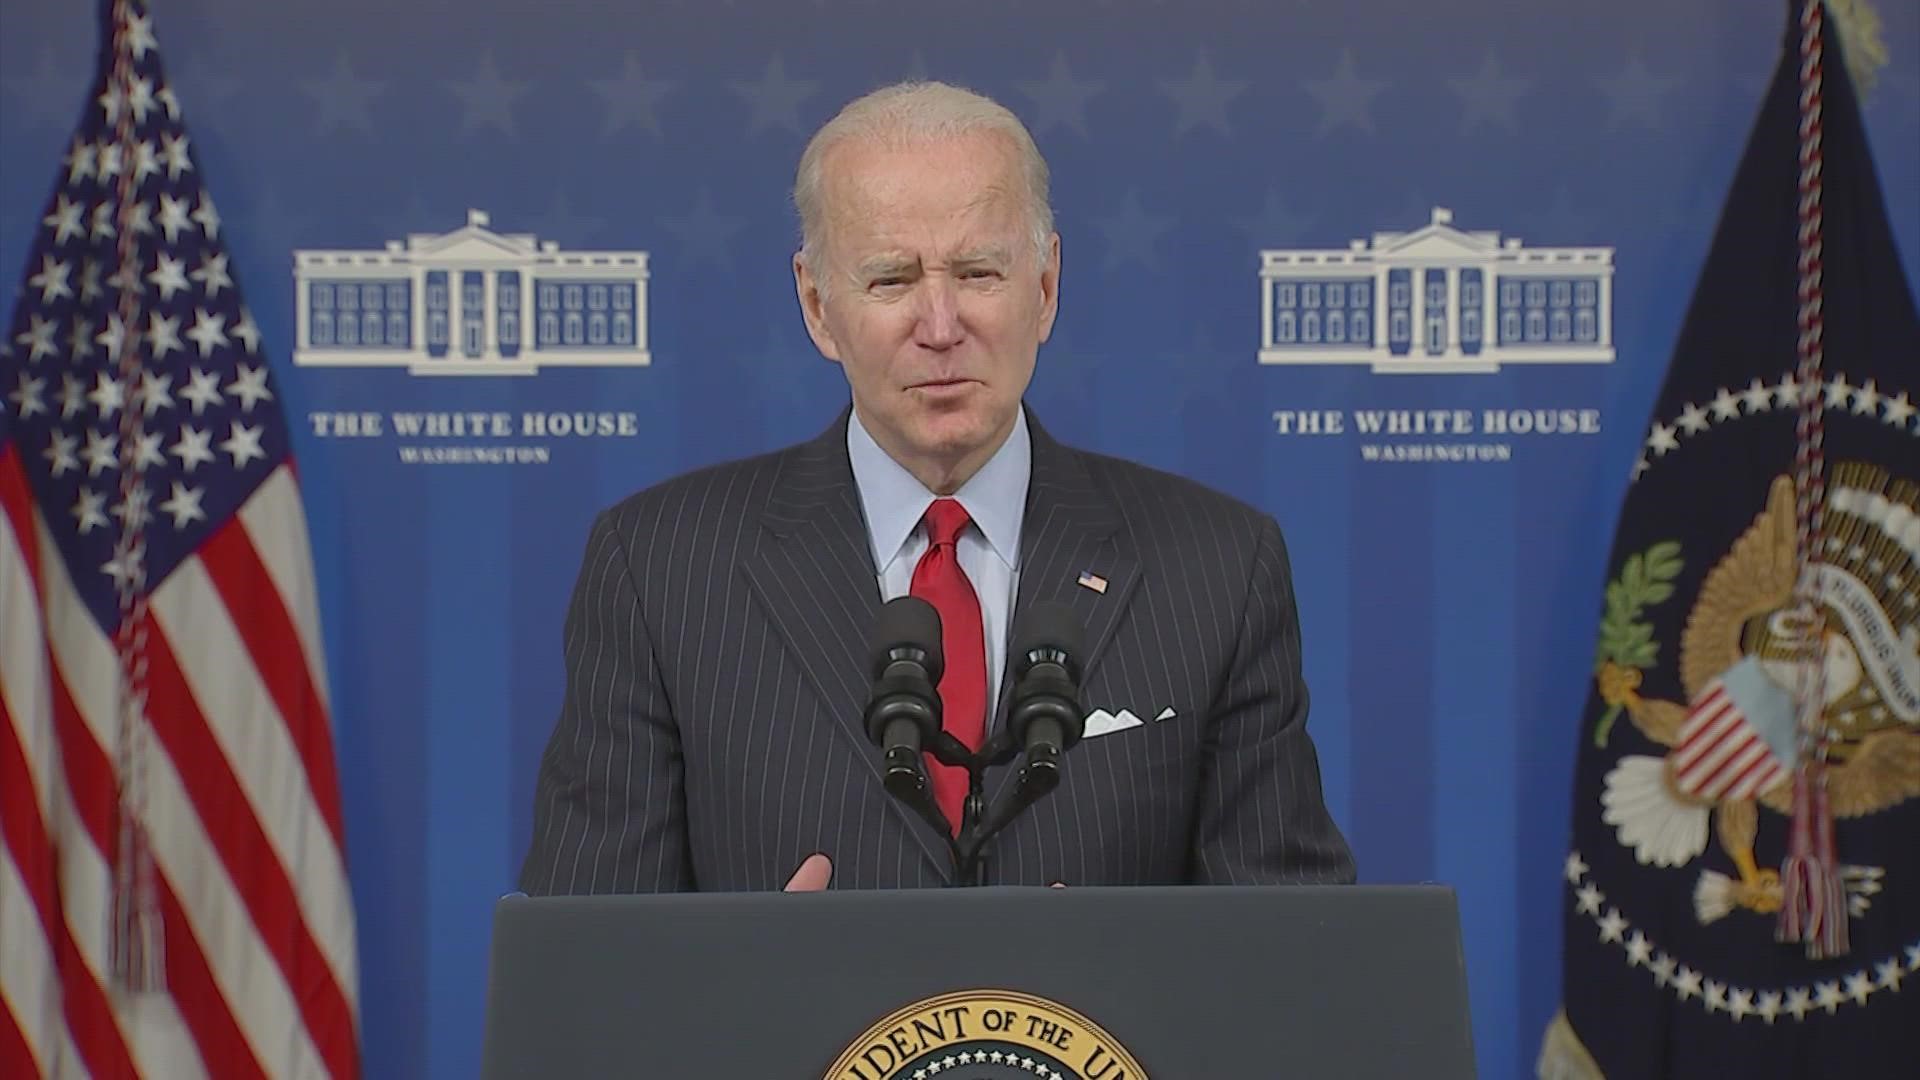 Biden said from the White House that it will take time, "but before long you should see the price of gas drop where you fill up your tank.”